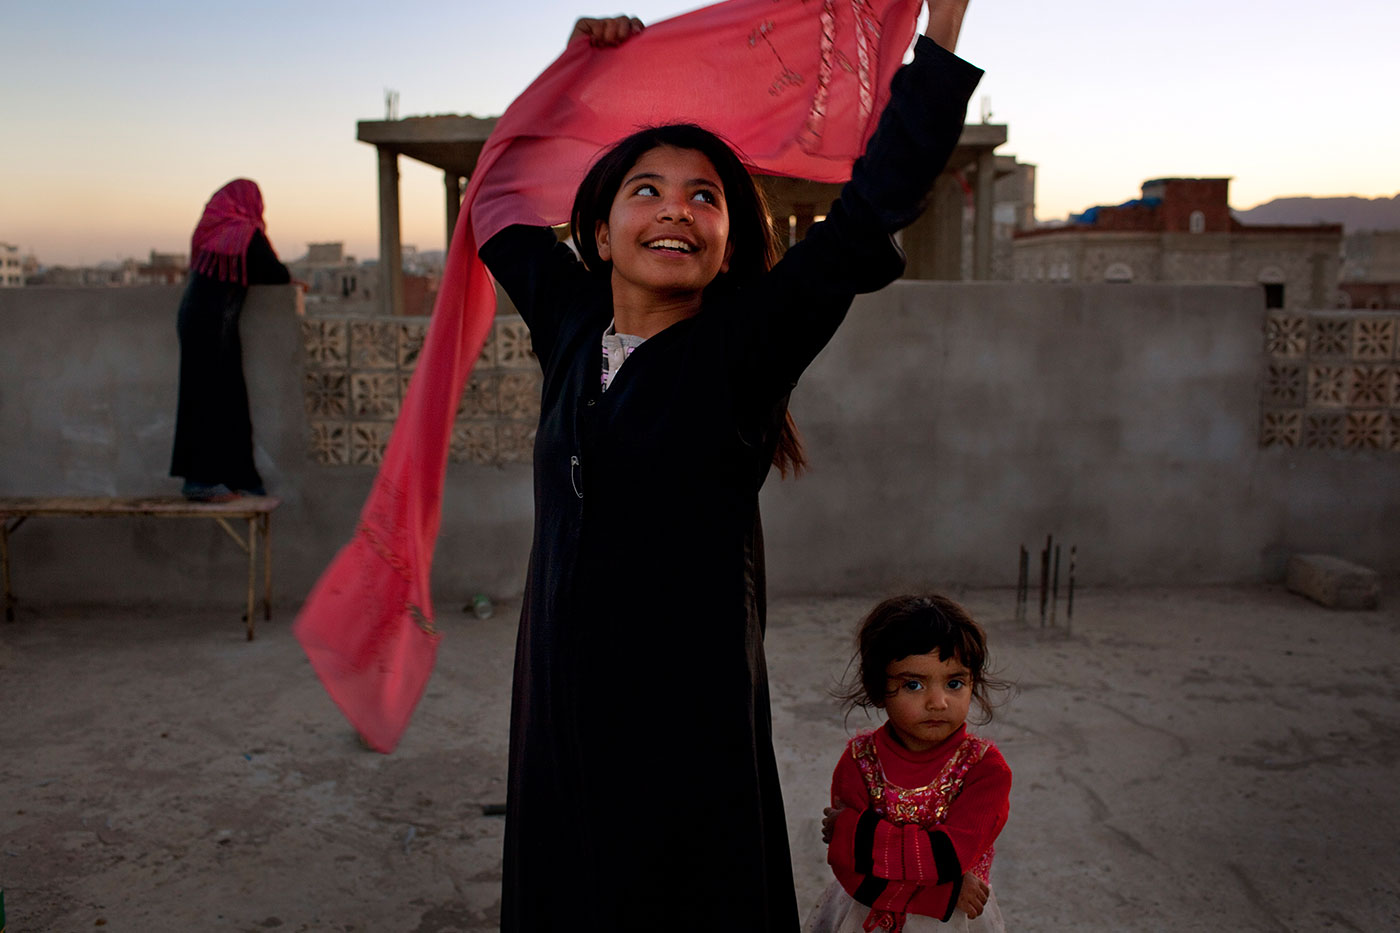 6. 10-year-old Yemeni girl after was granted divorce from her abusive husband